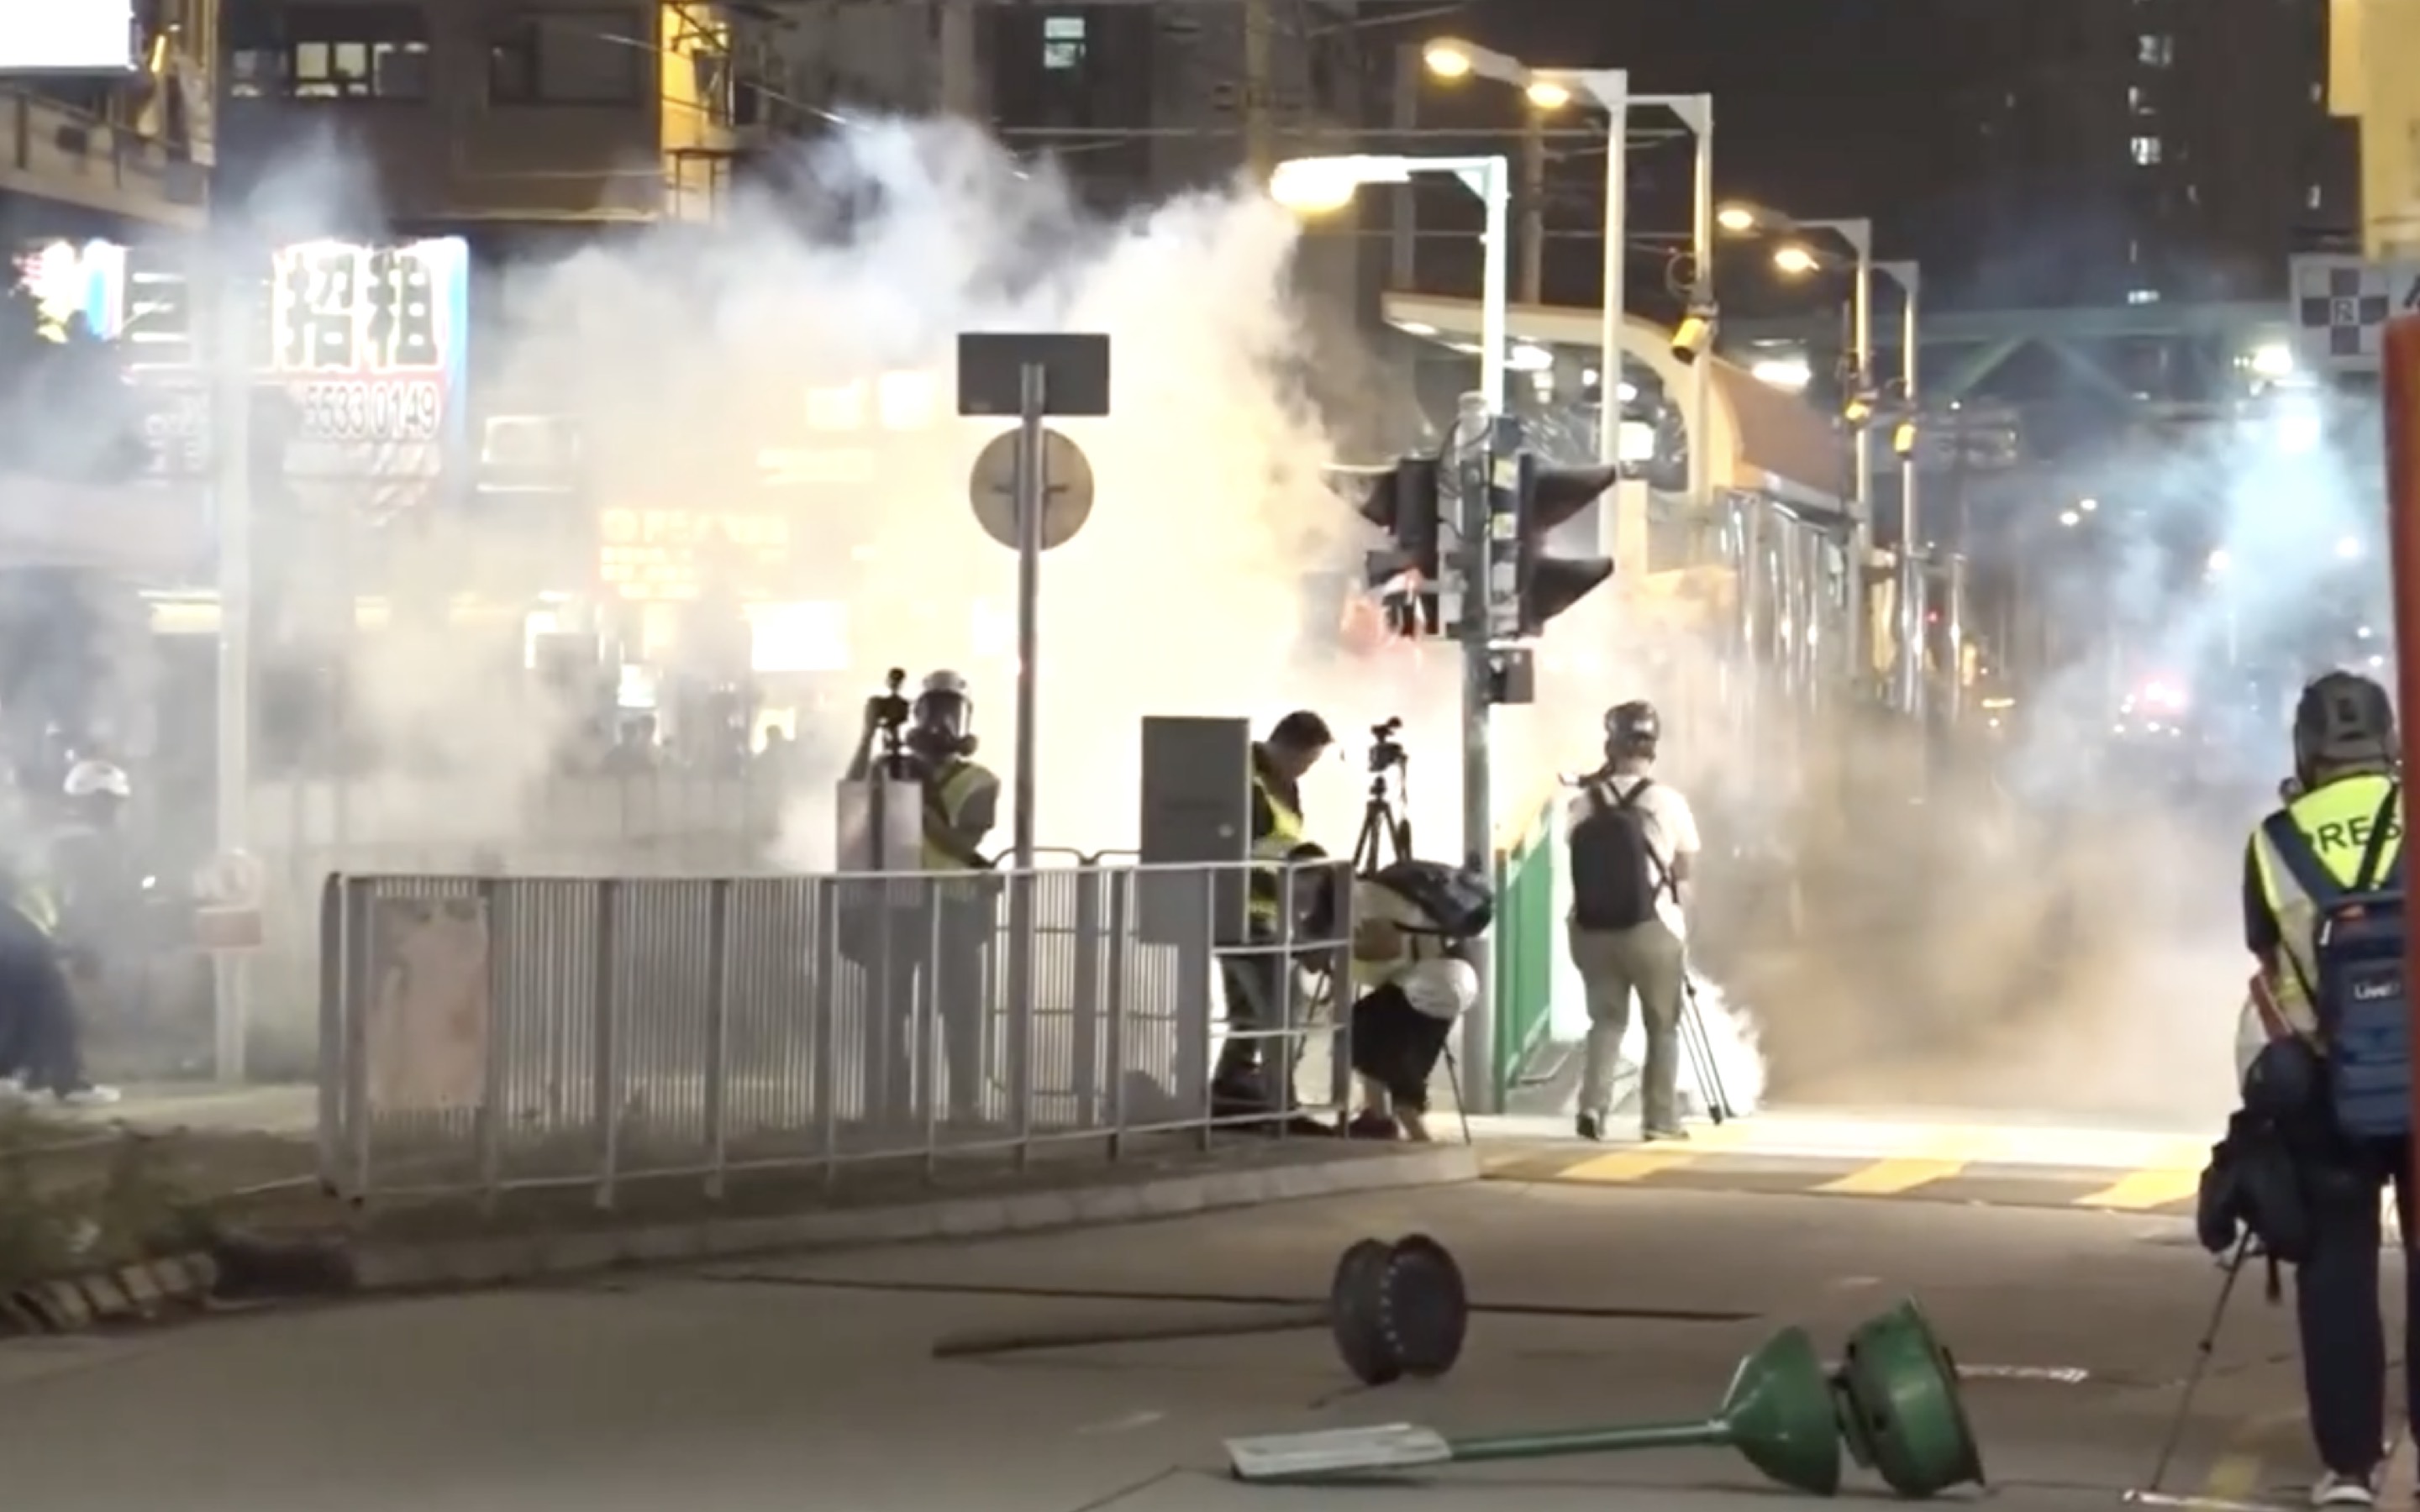 Frontline journalists get caught up in tear gas at a protest marking the third anniversary of the July 21 incident. Screengrab via Facebook/RTHK.